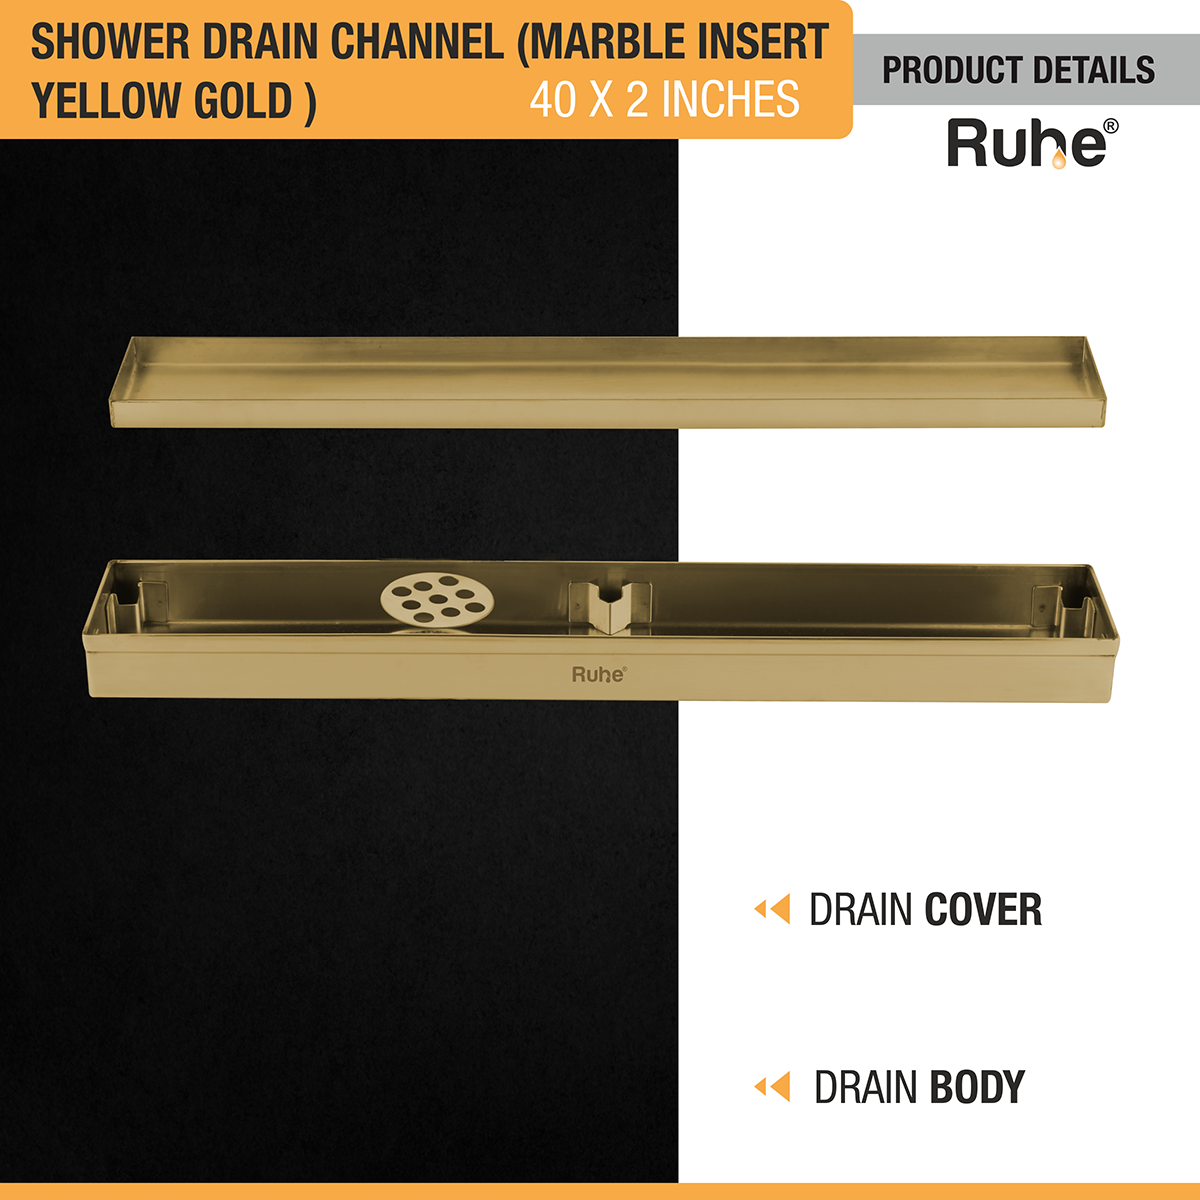 Marble Insert Shower Drain Channel (40 x 2 Inches) YELLOW GOLD PVD Coated with drain cover and drain body